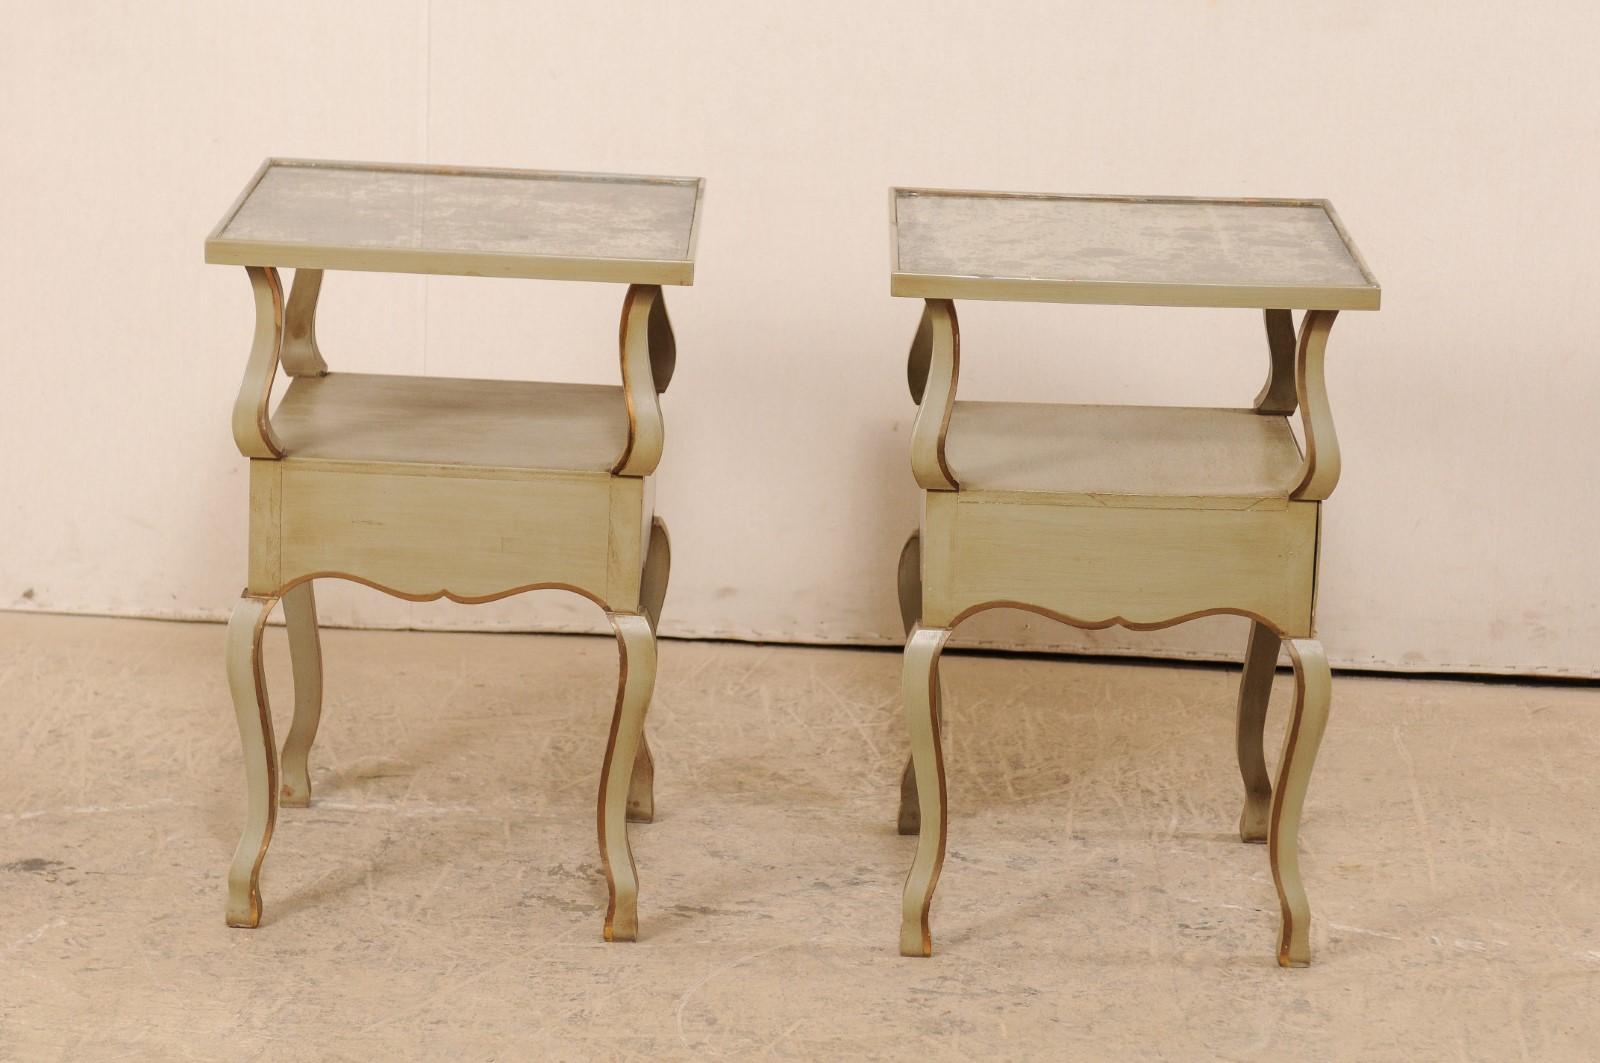 20th Century Pair of French Mirror-Top Side Tables, circa 1930s